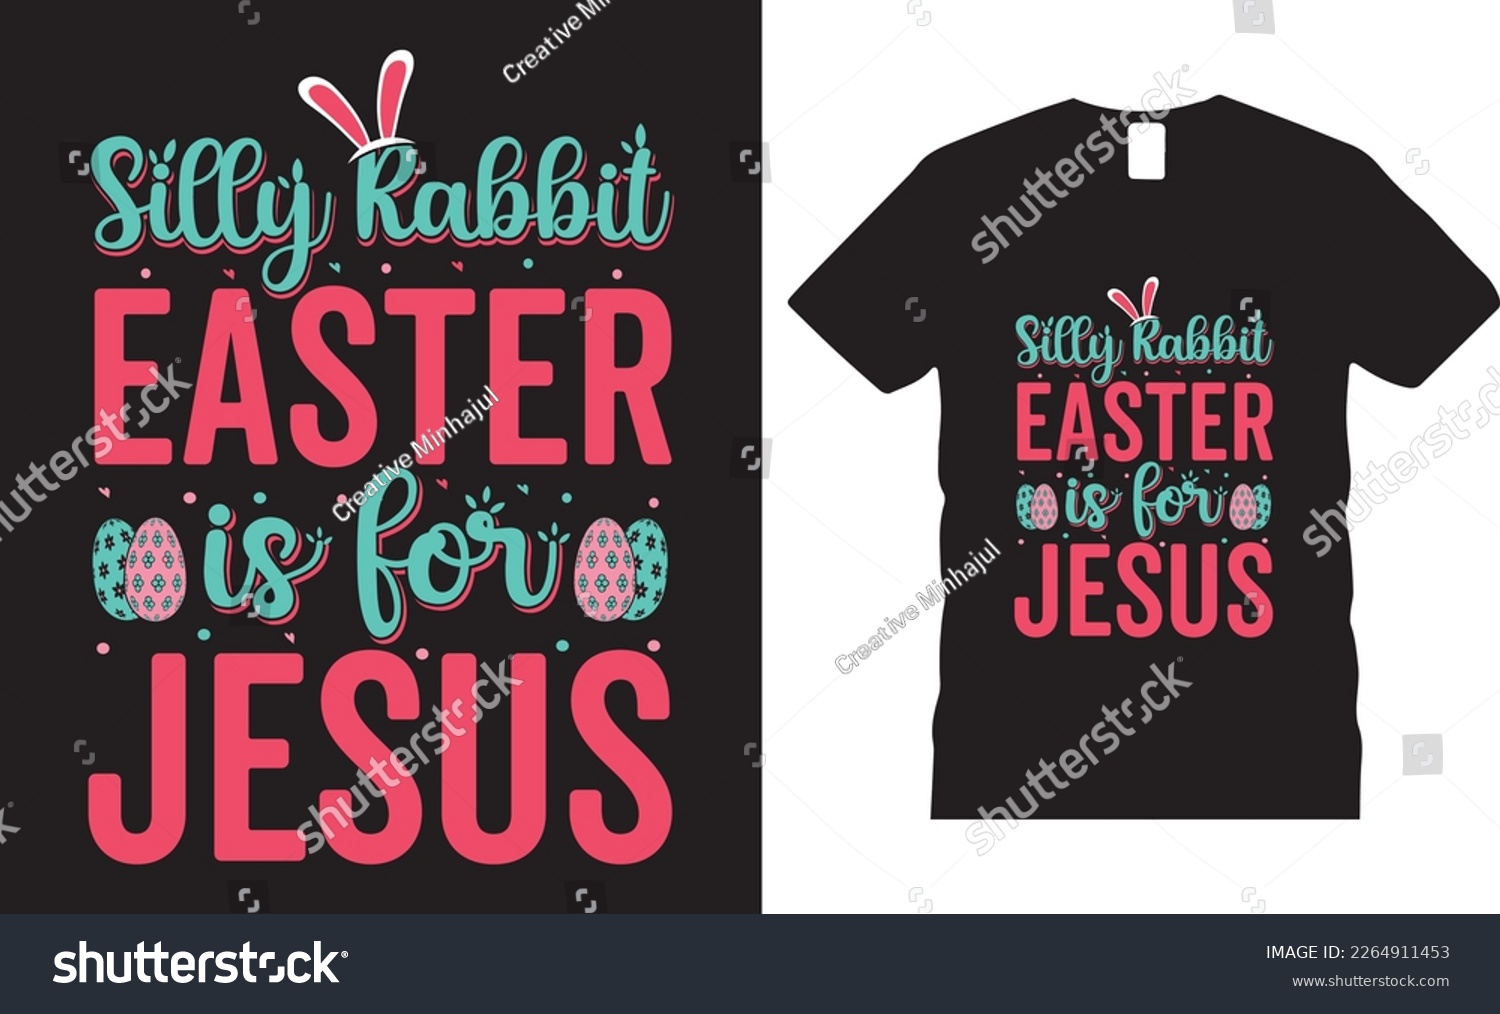 SVG of Happy easter rabbit, bunny tshirt vector design template.silly easter is for jesus t-shirt design.Ready to print for apparel, poster, mug and greeting plate illustration. svg